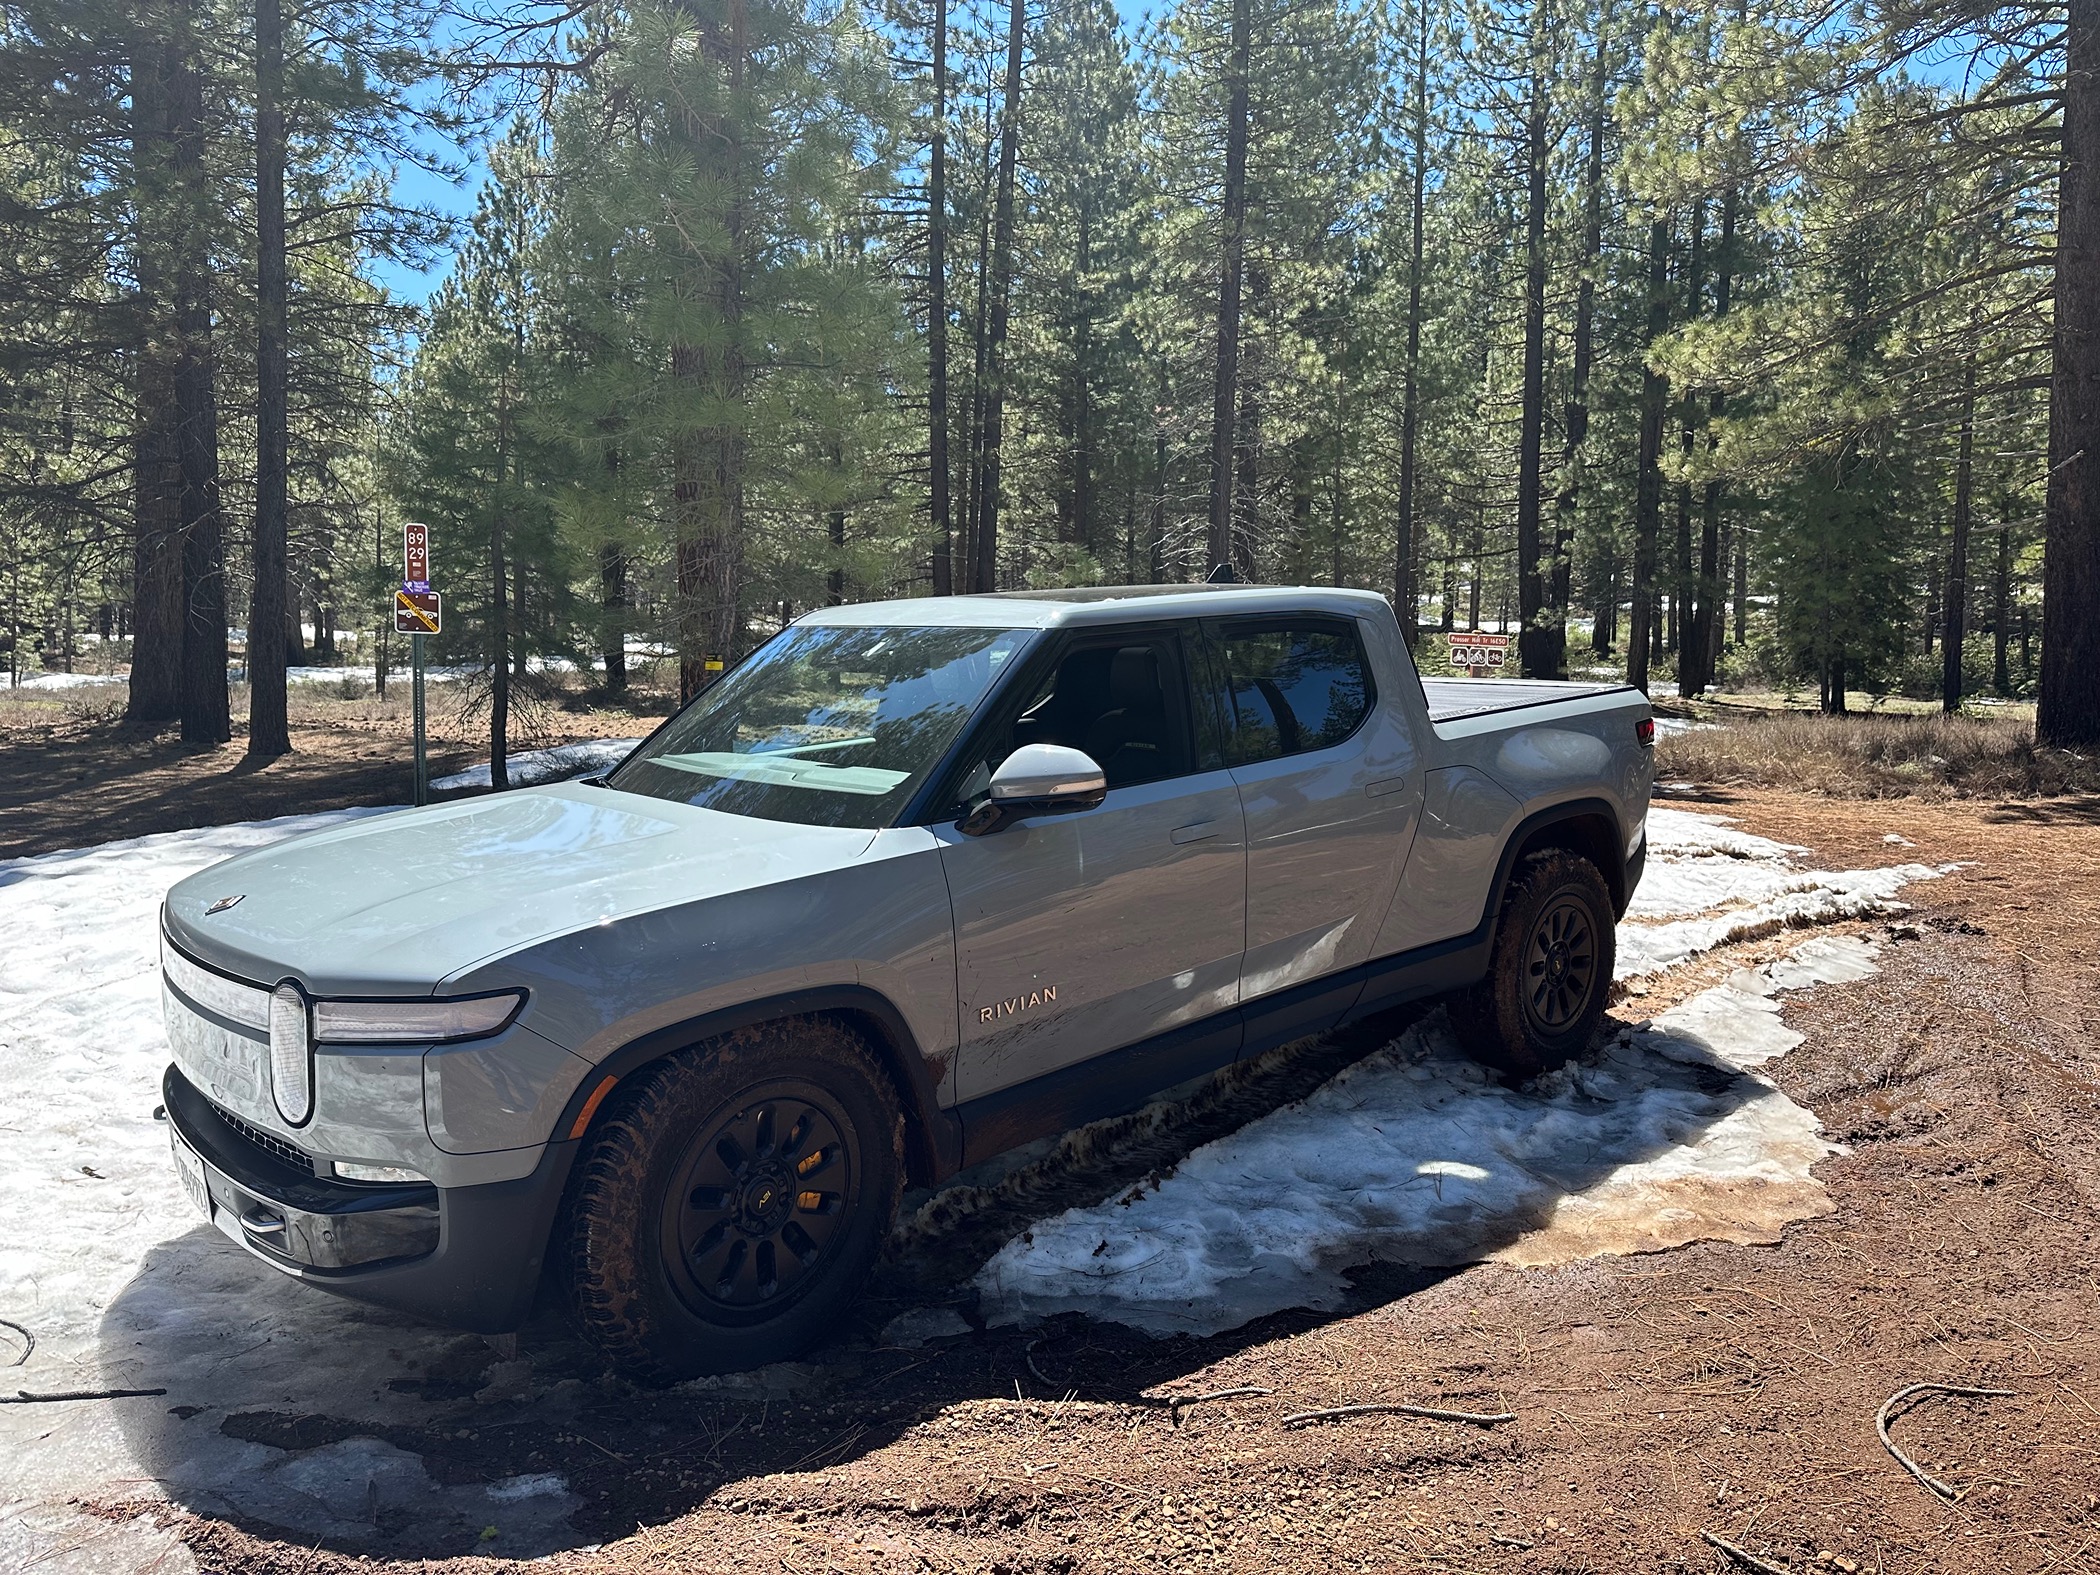 Rivian R1T R1S Random Rivian Photos of the Day - Post Yours! 📸 🤳 IMG_0899